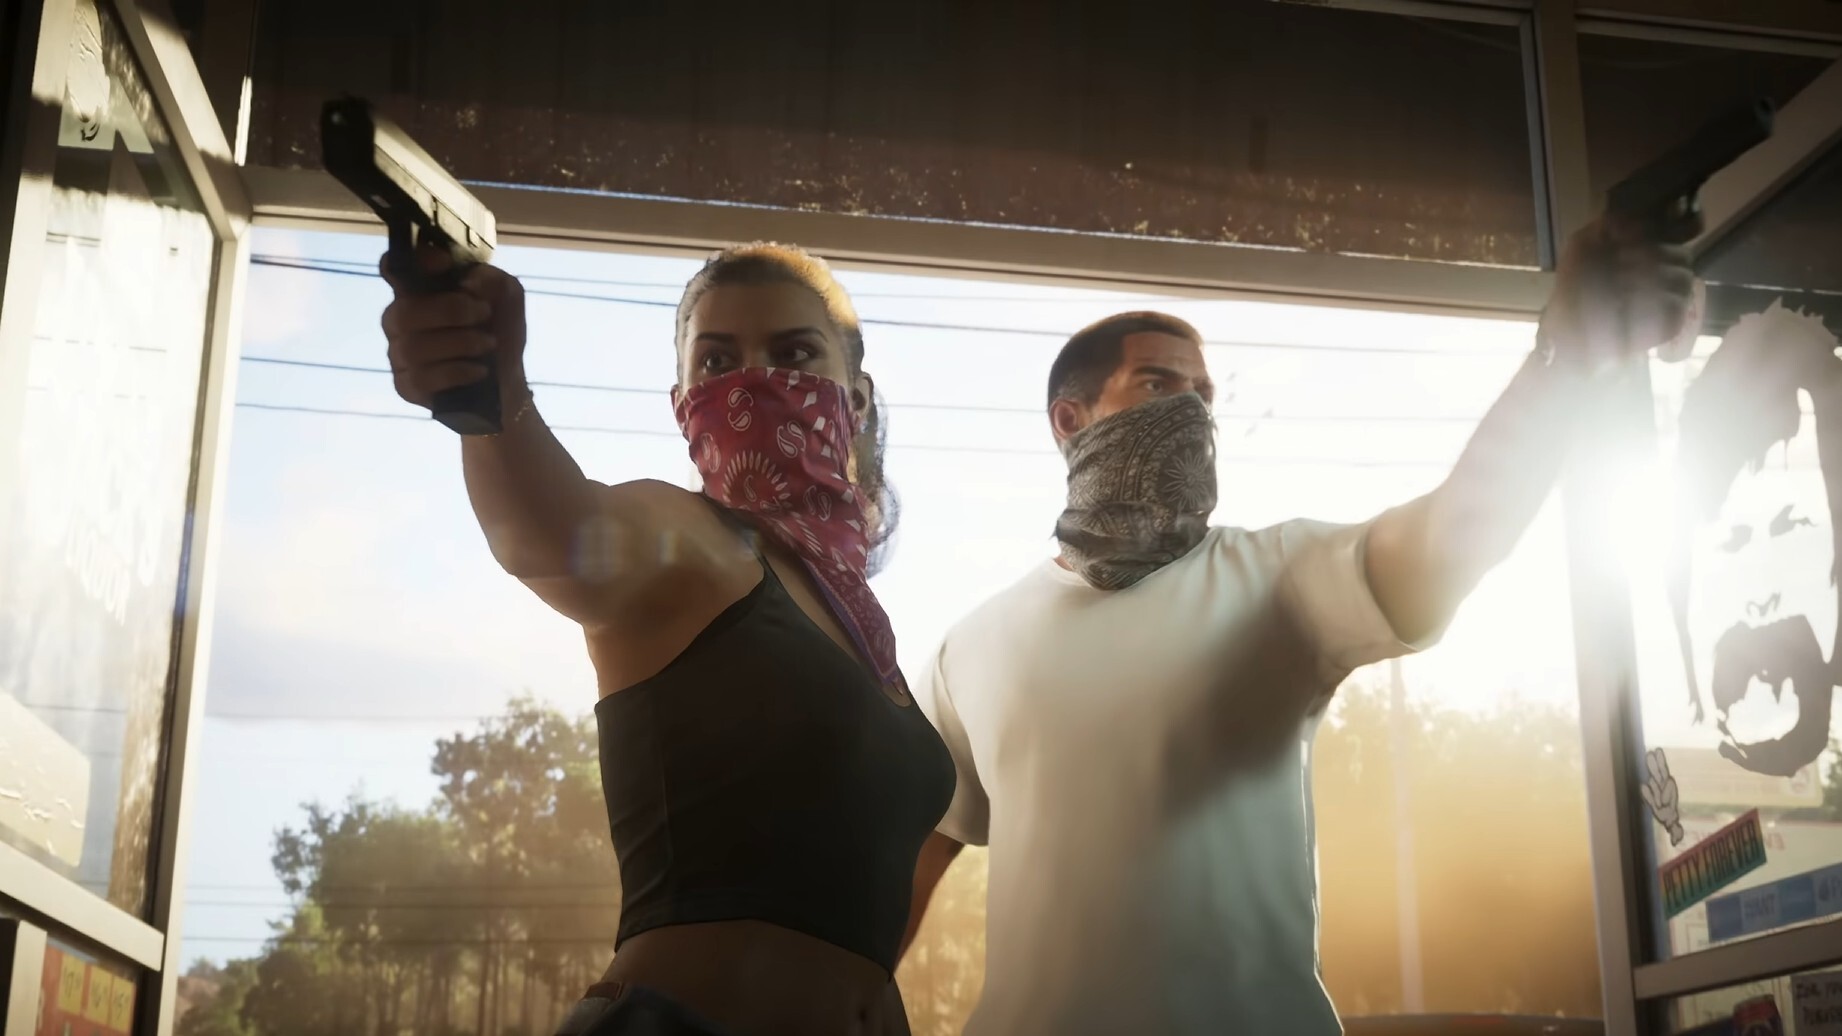 Rockstar joins the PC gaming platform wars with the 'Rockstar